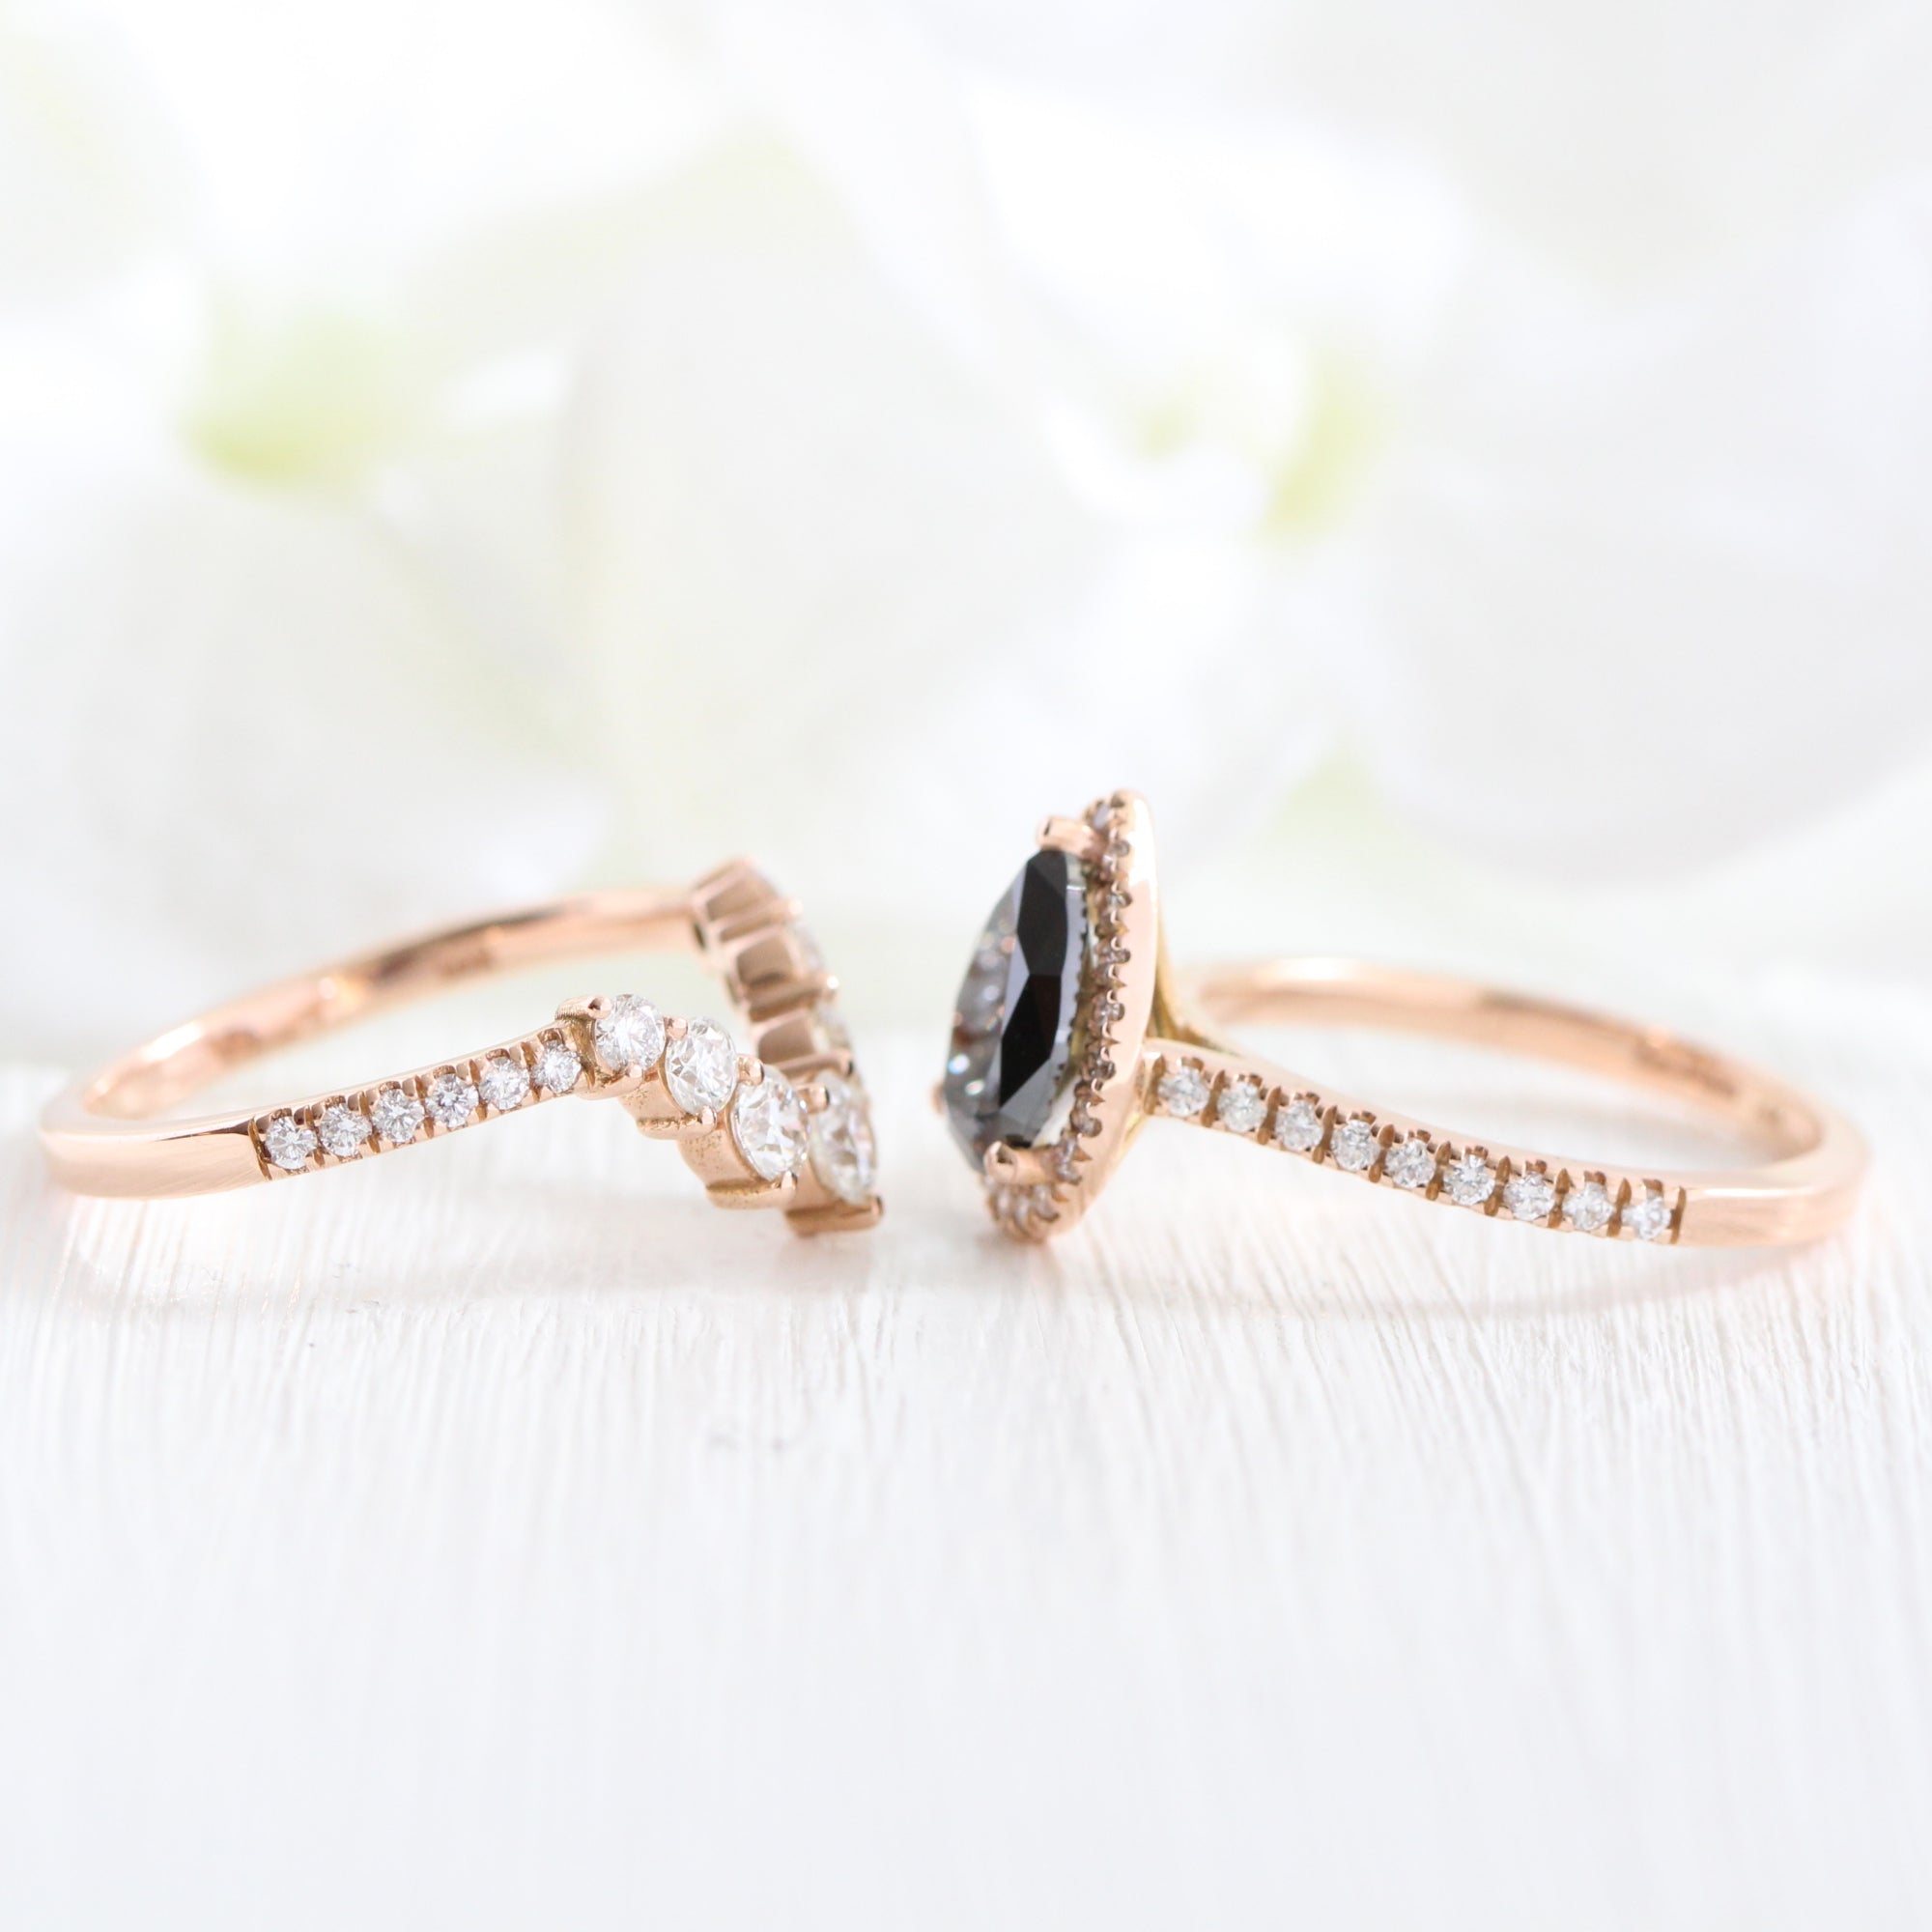 pear black diamond ring rose gold curved diamond wedding band stacking rings la more design jewelry